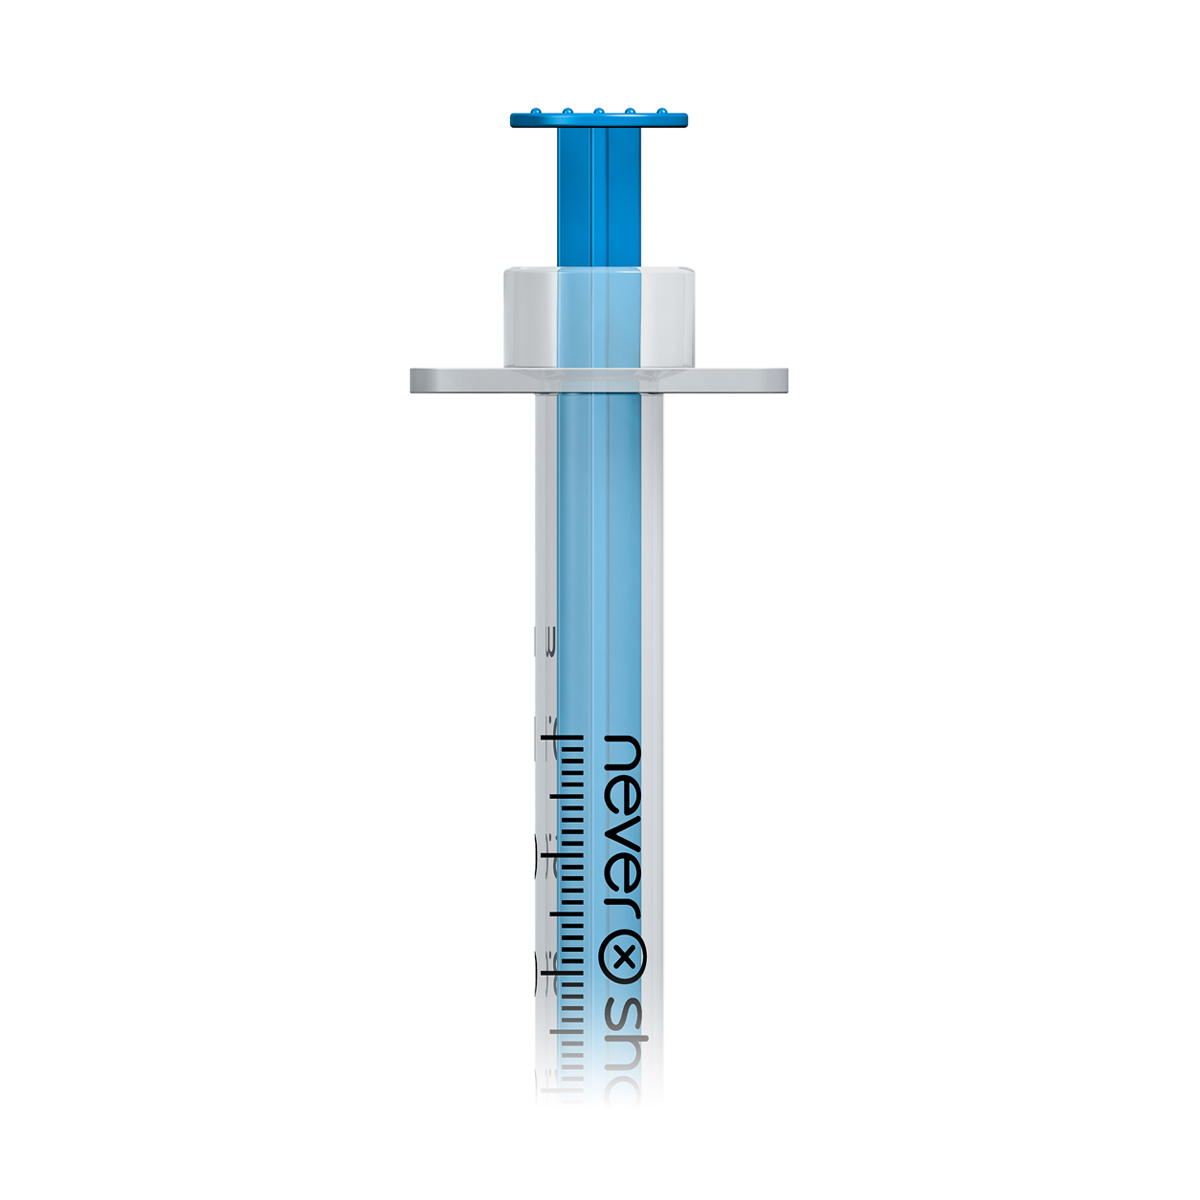 Nevershare 1ml 30G fixed needle syringe: blue  (discontinued, see below)